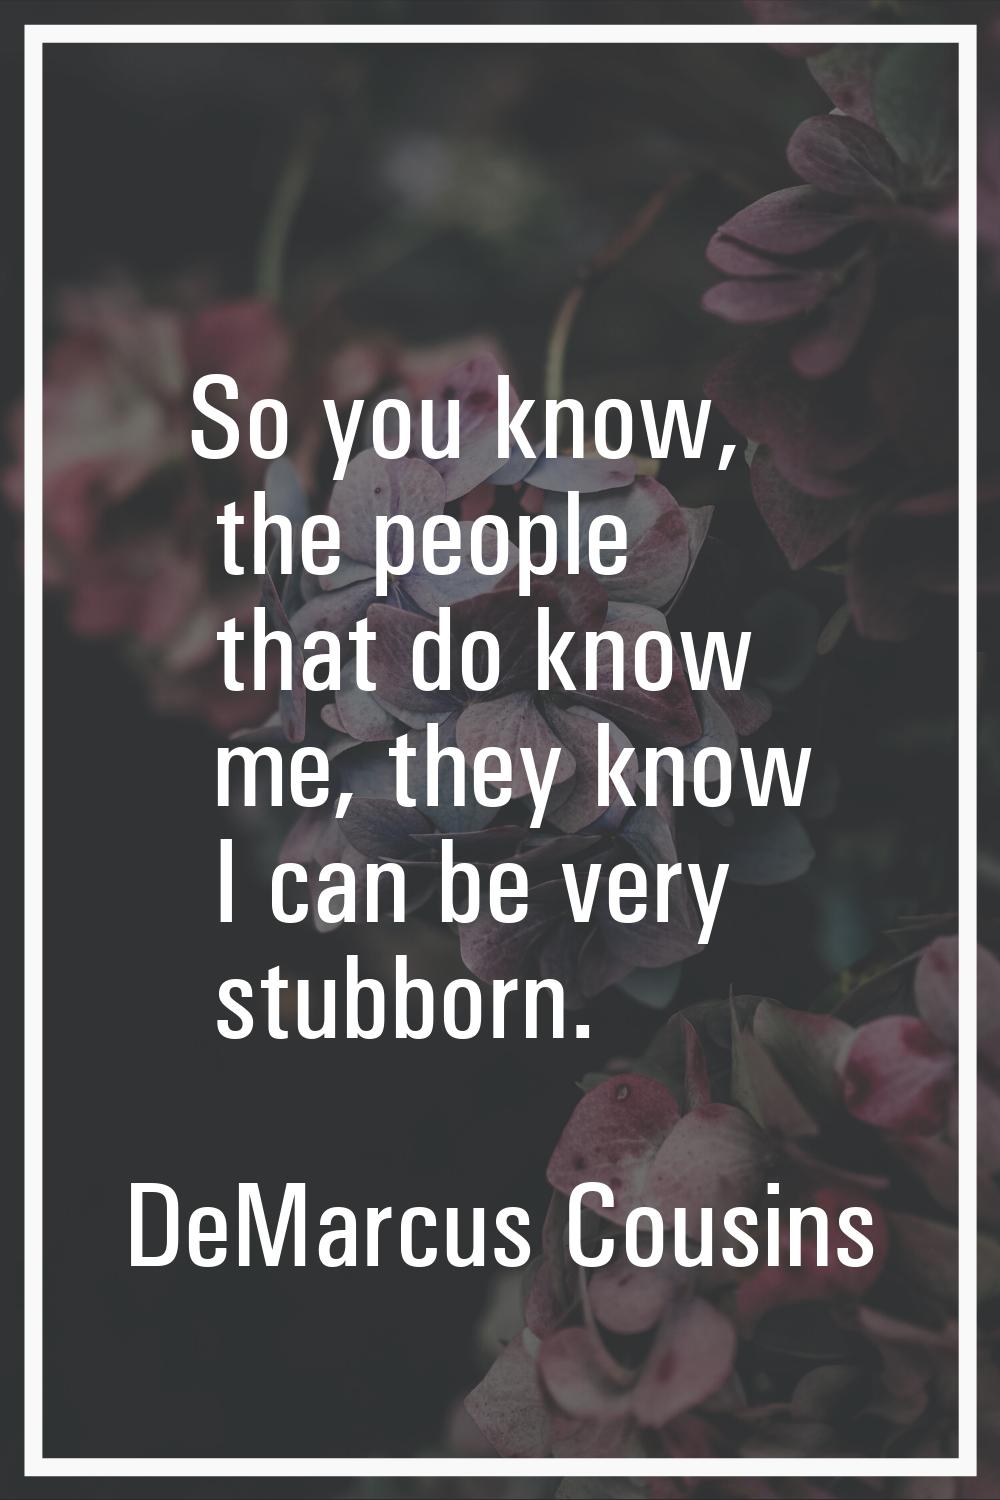 So you know, the people that do know me, they know I can be very stubborn.